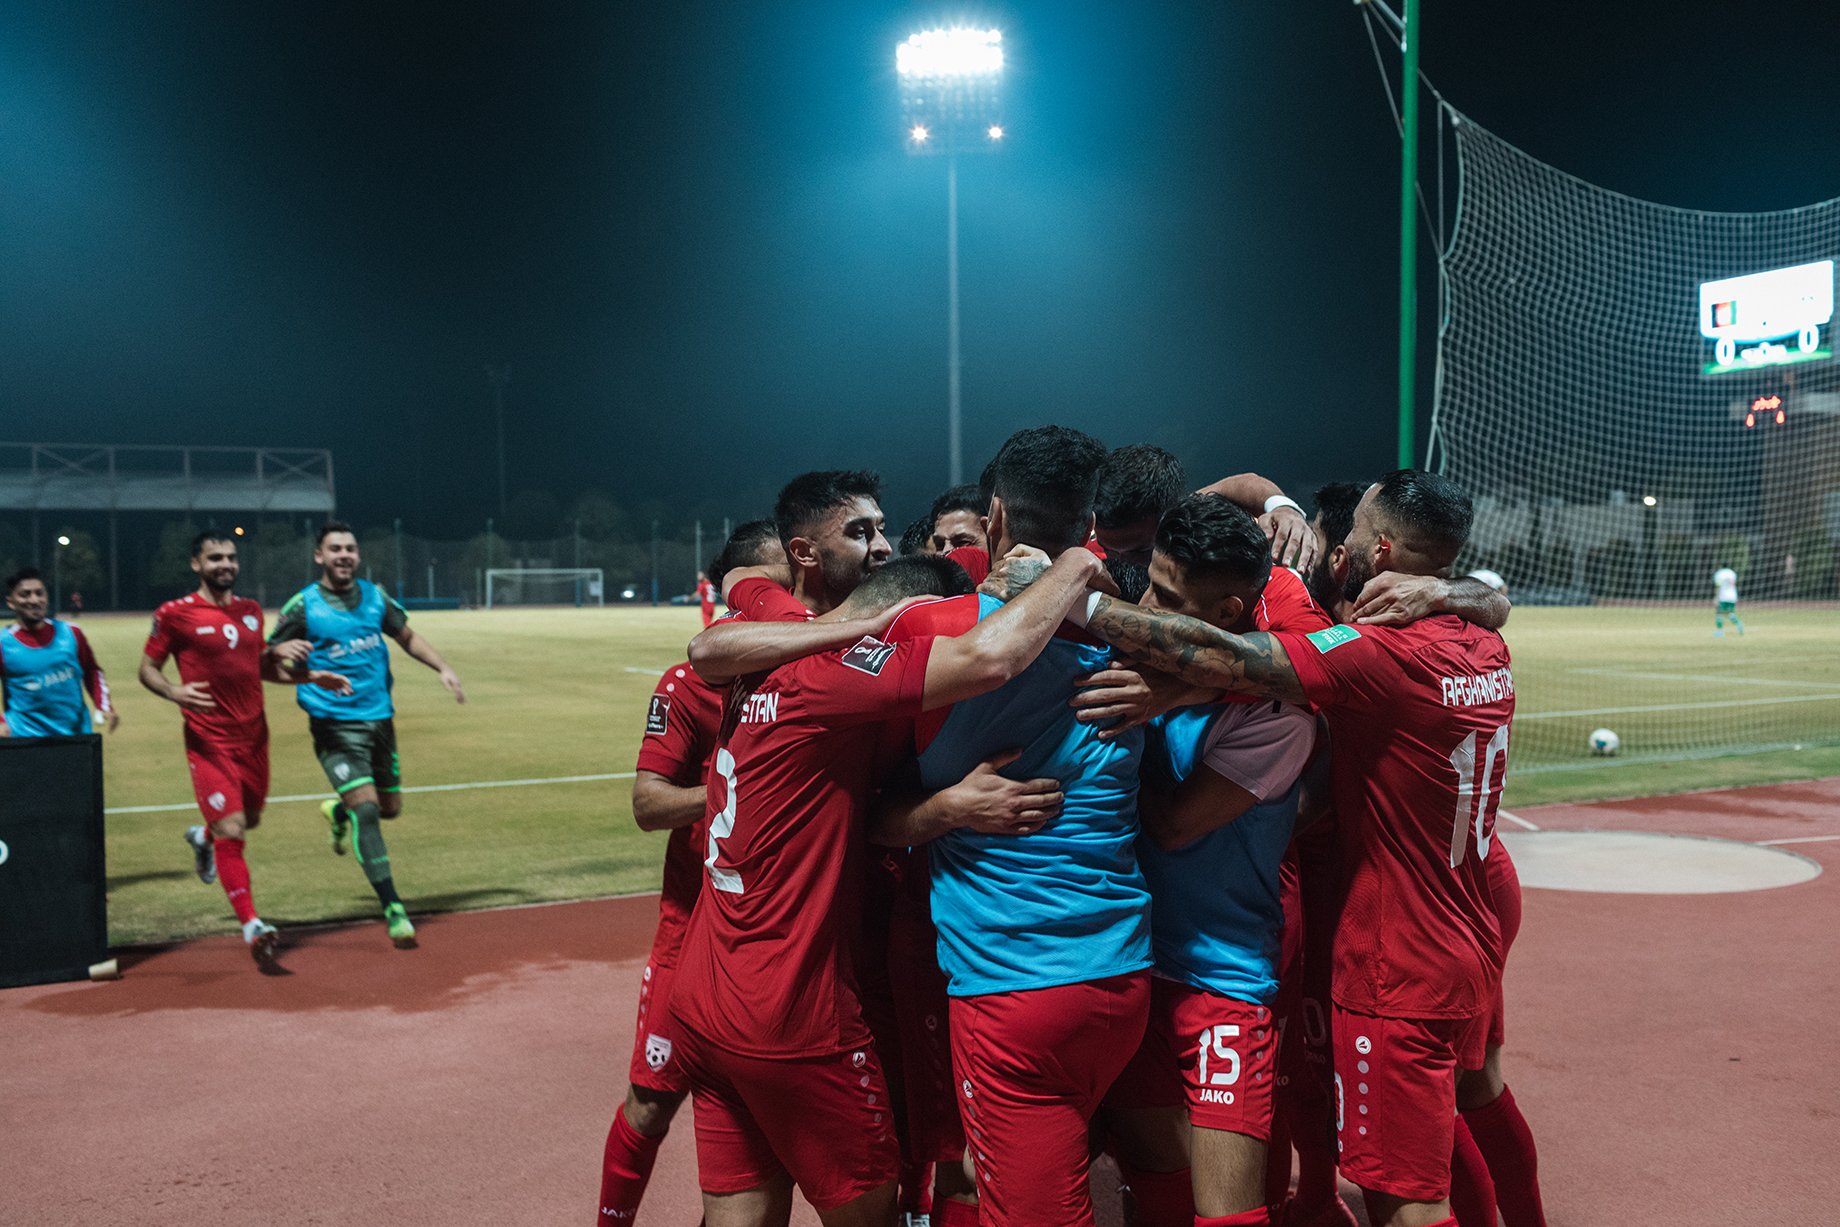 The Afghan national team celebrate a 1-0 victory against Indonesia in the team's first match since the Taliban took control of Afghanistan. Shot by Bradley Secker for the New York Times.